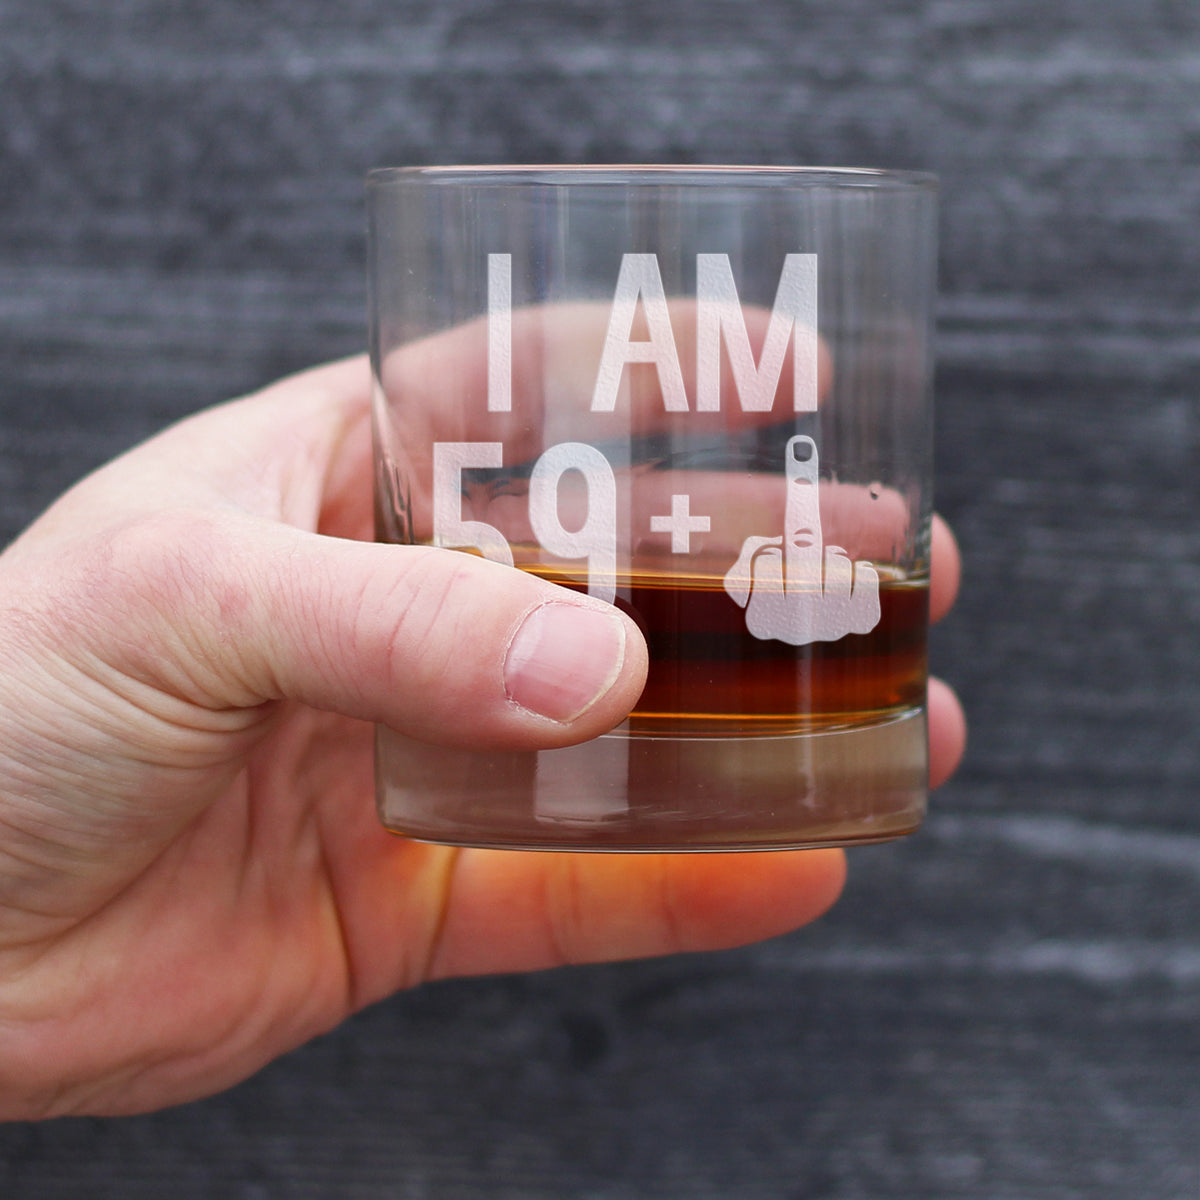 59 + 1 Middle Finger - Funny 60th Birthday Whiskey Rocks Glass Gifts for Men &amp; Women Turning 60 - Fun Whisky Drinking Tumbler